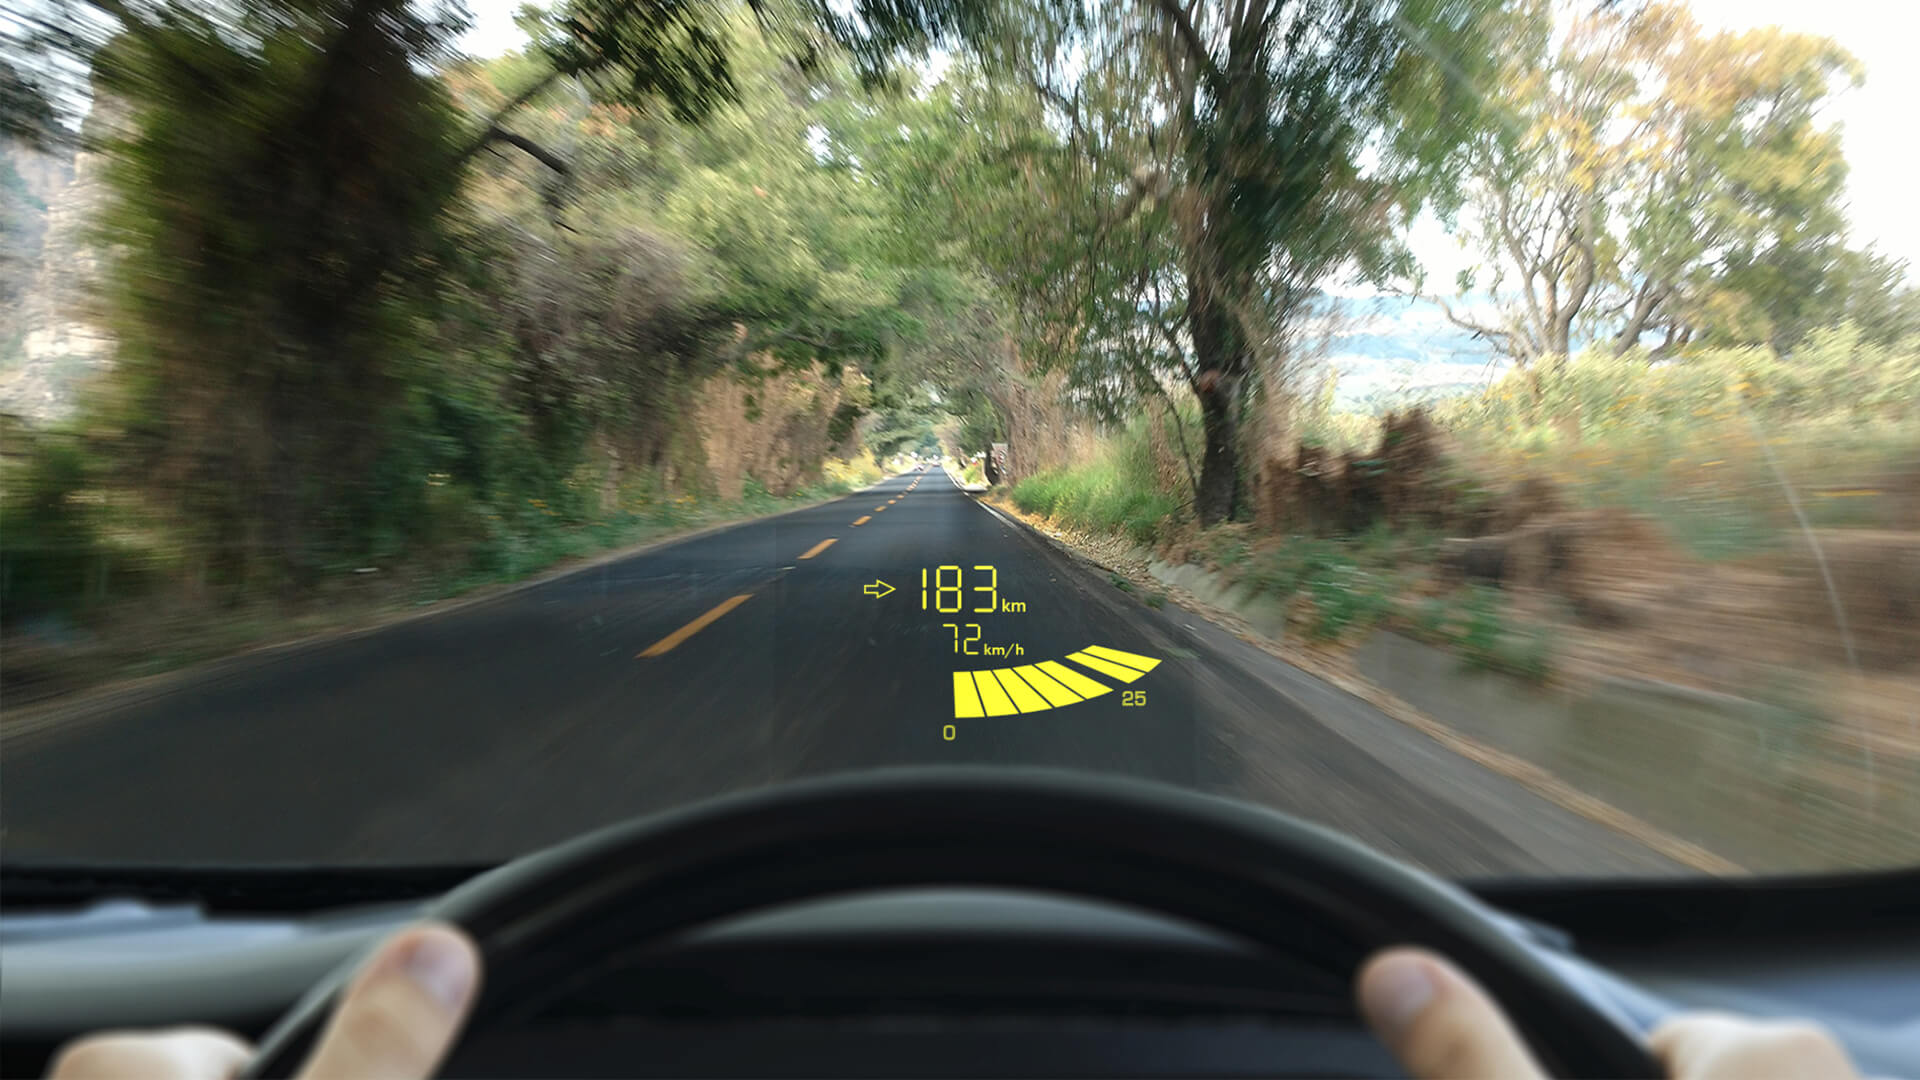 Pros and cons of different head-up display solutions for vehicles